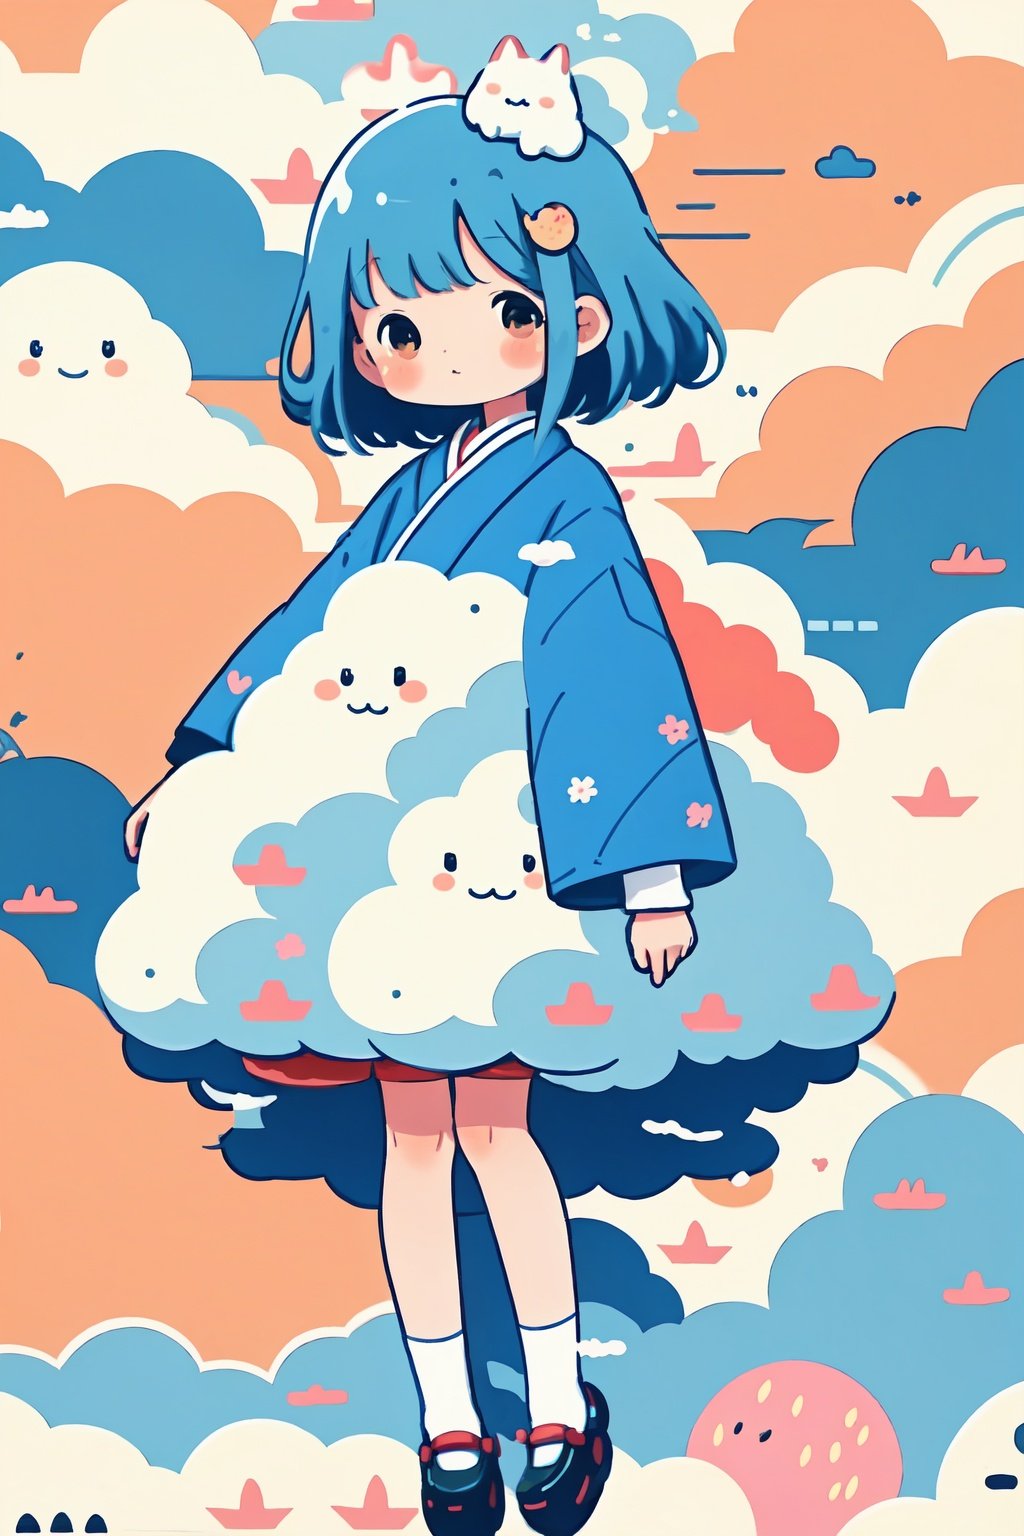 style of Chiho Aoshima, adorable, cute, a girl, royal blue hair, puffy dress, flying donuts, full body, warm colors, simple white background, in clouds, Illustration, cover art, japan, blur, shiny,minimalistic,simplecats